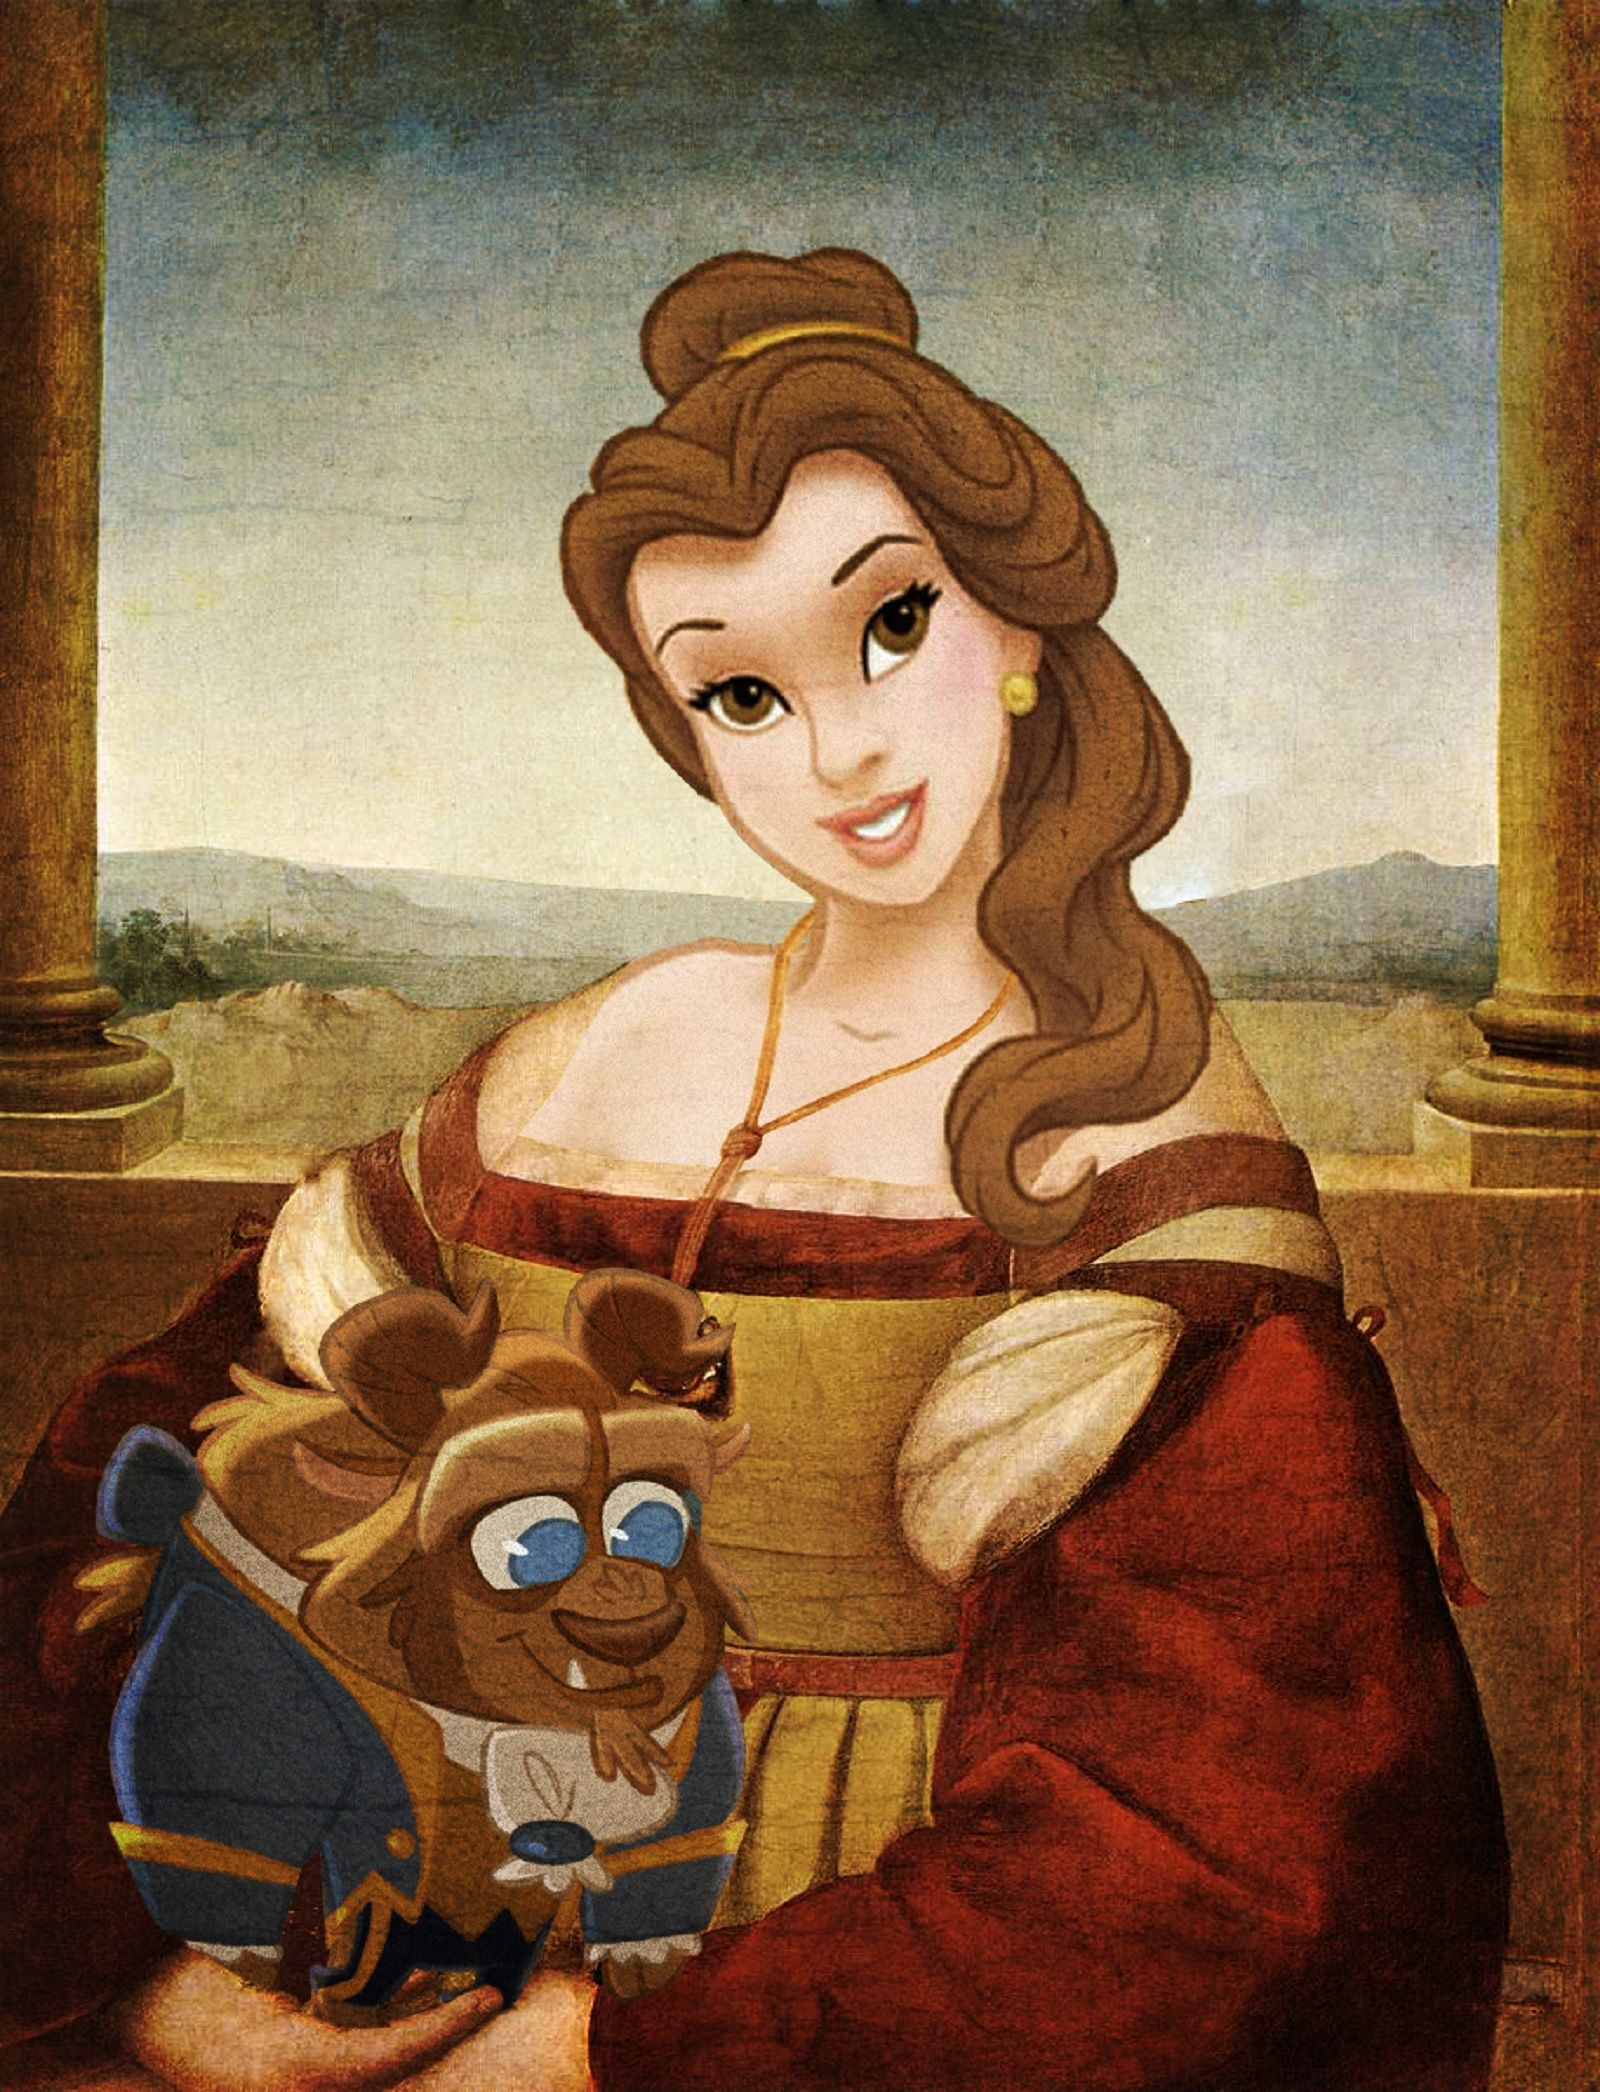 Amusing Images Of Cartoon Characters In Photoshopped Into Renaissance Paintings photo 5